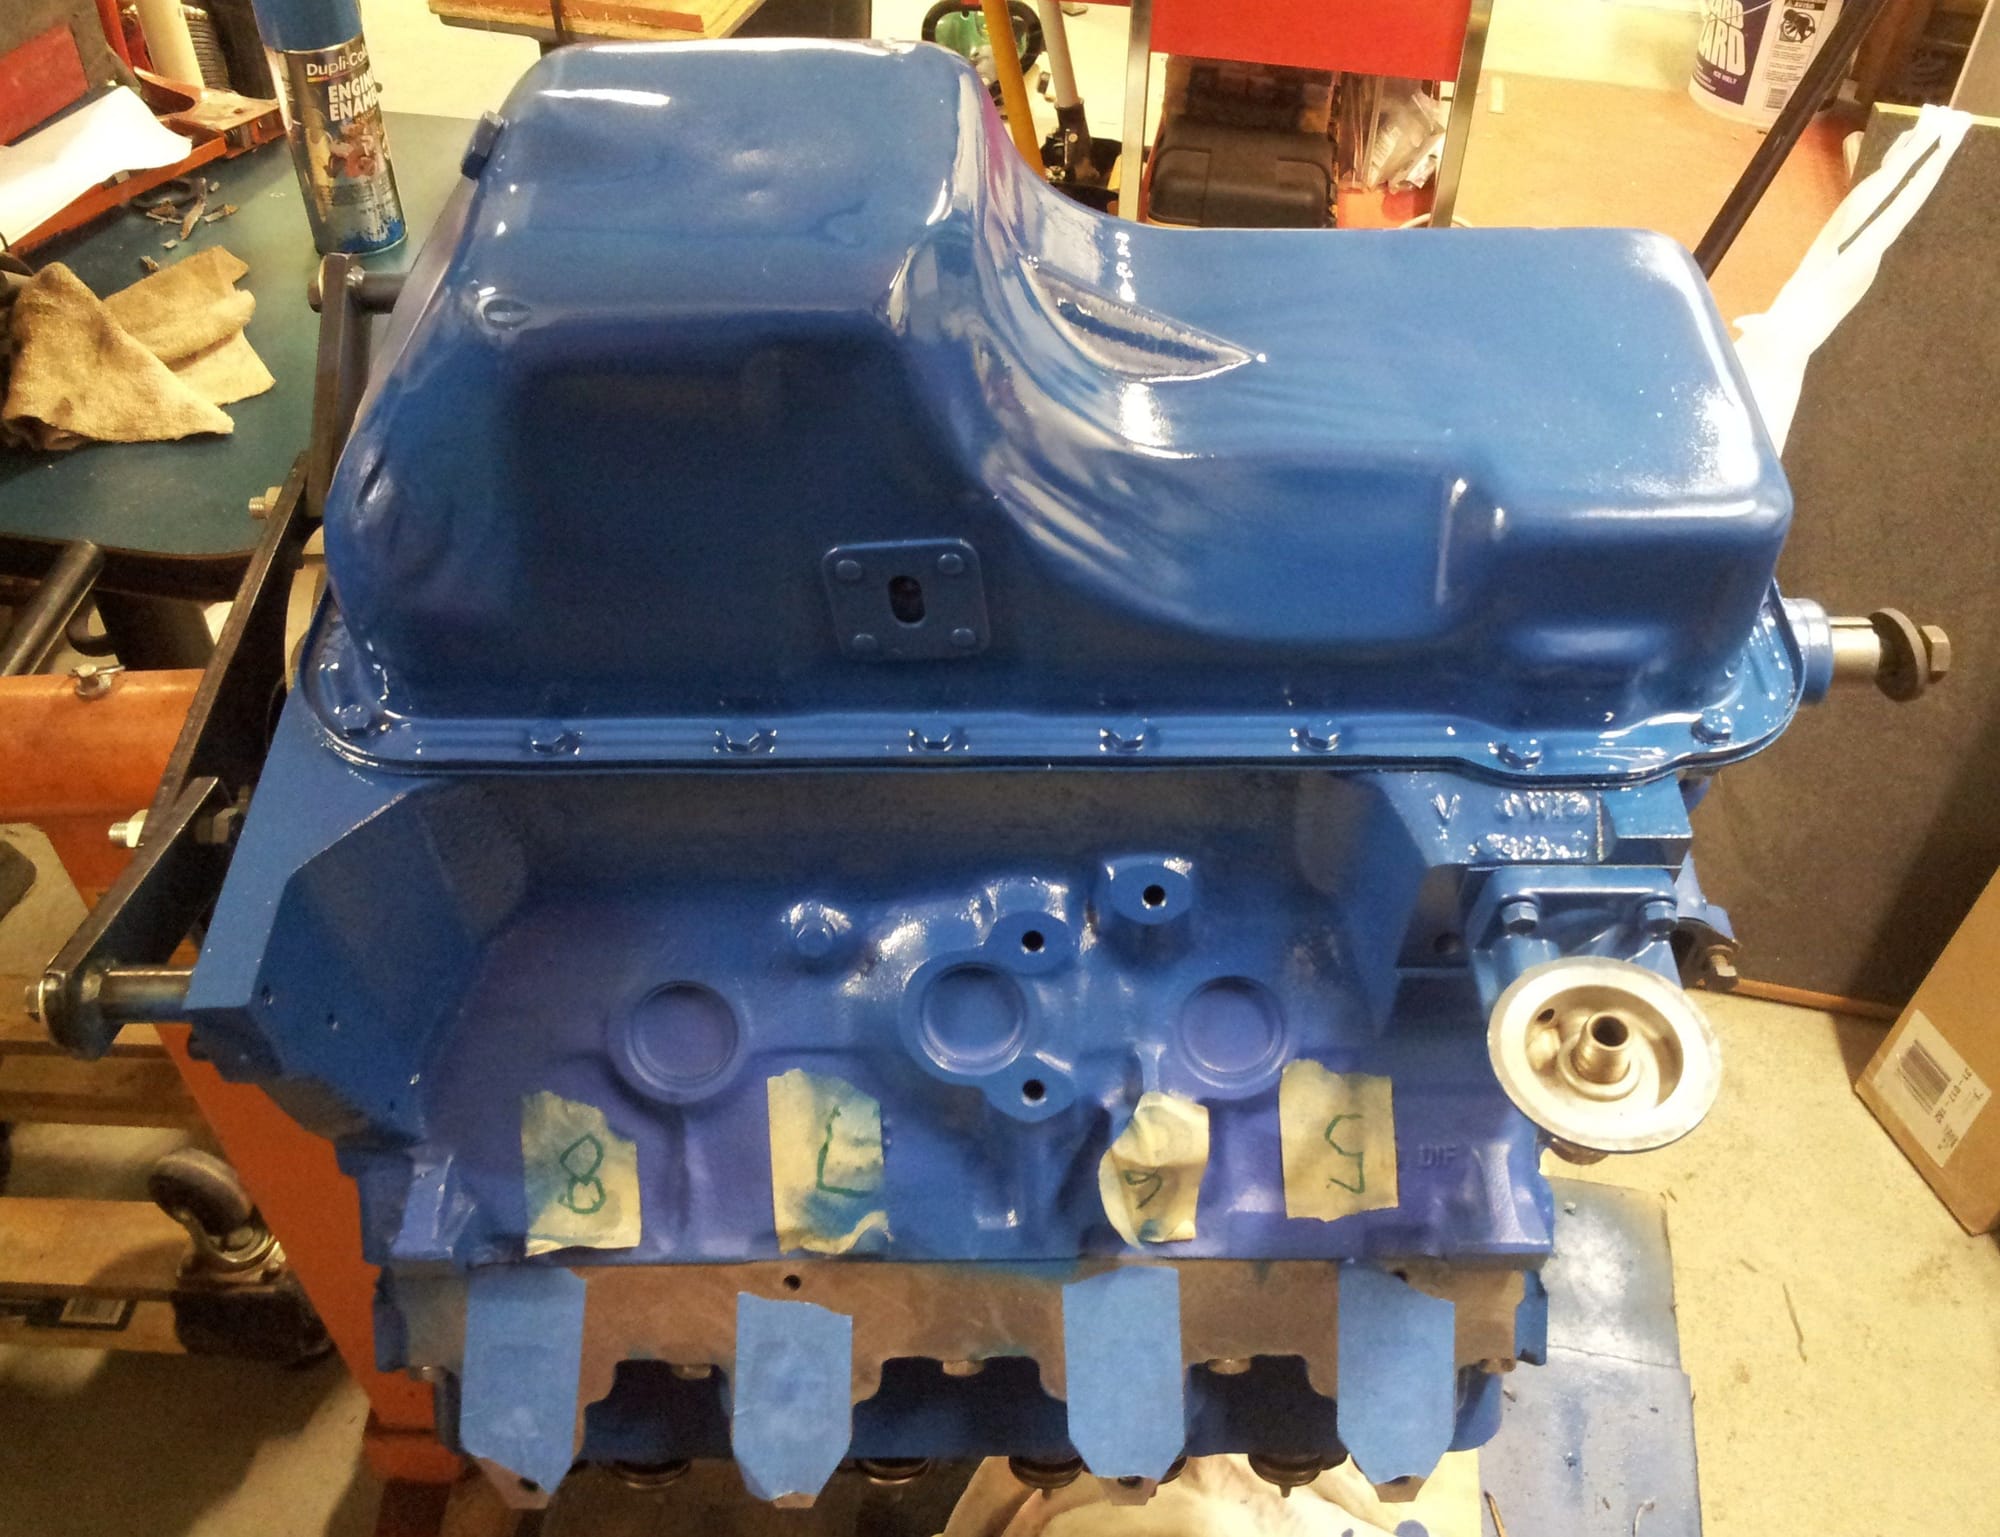 1970 F250 4X4 Rebuild - Page 3 - Ford Truck Enthusiasts Forums